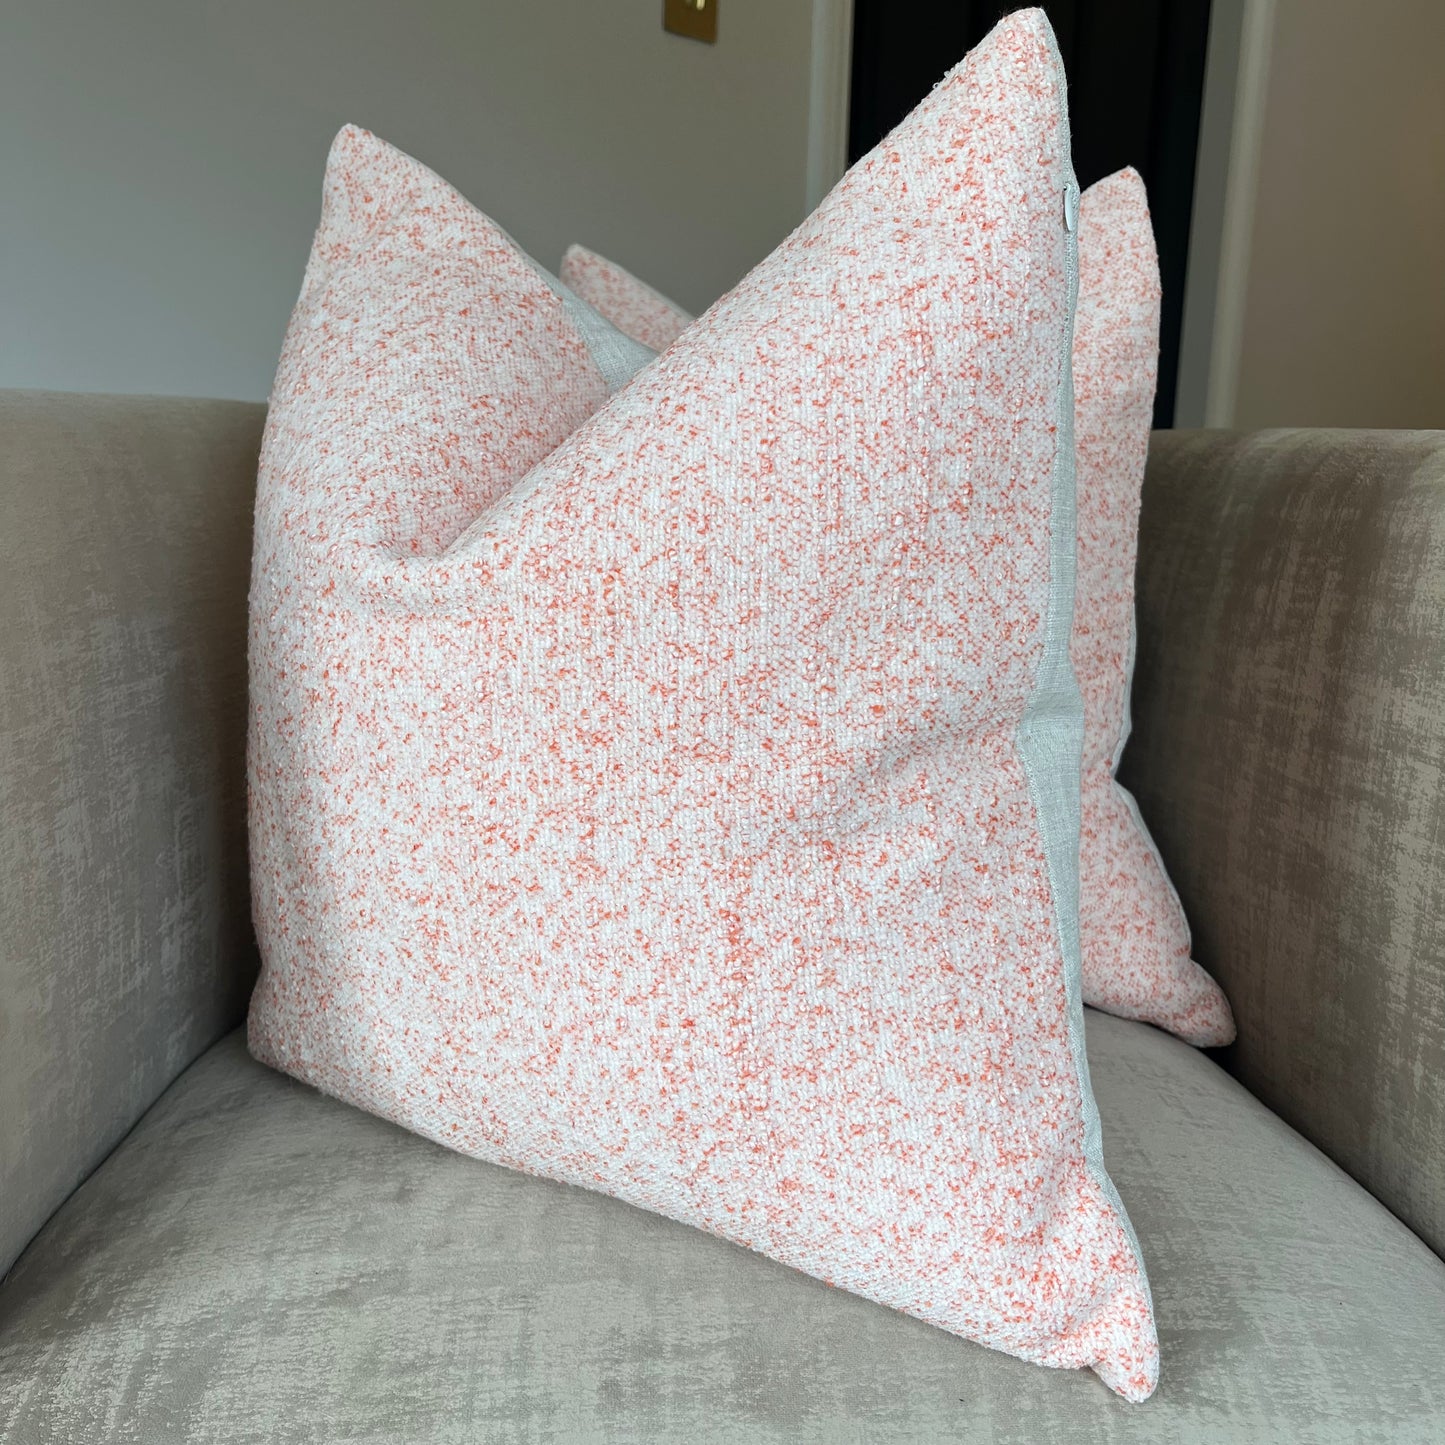 Confetti Pink Cream Speckled Pattern Cushion - LIMITED EDITION